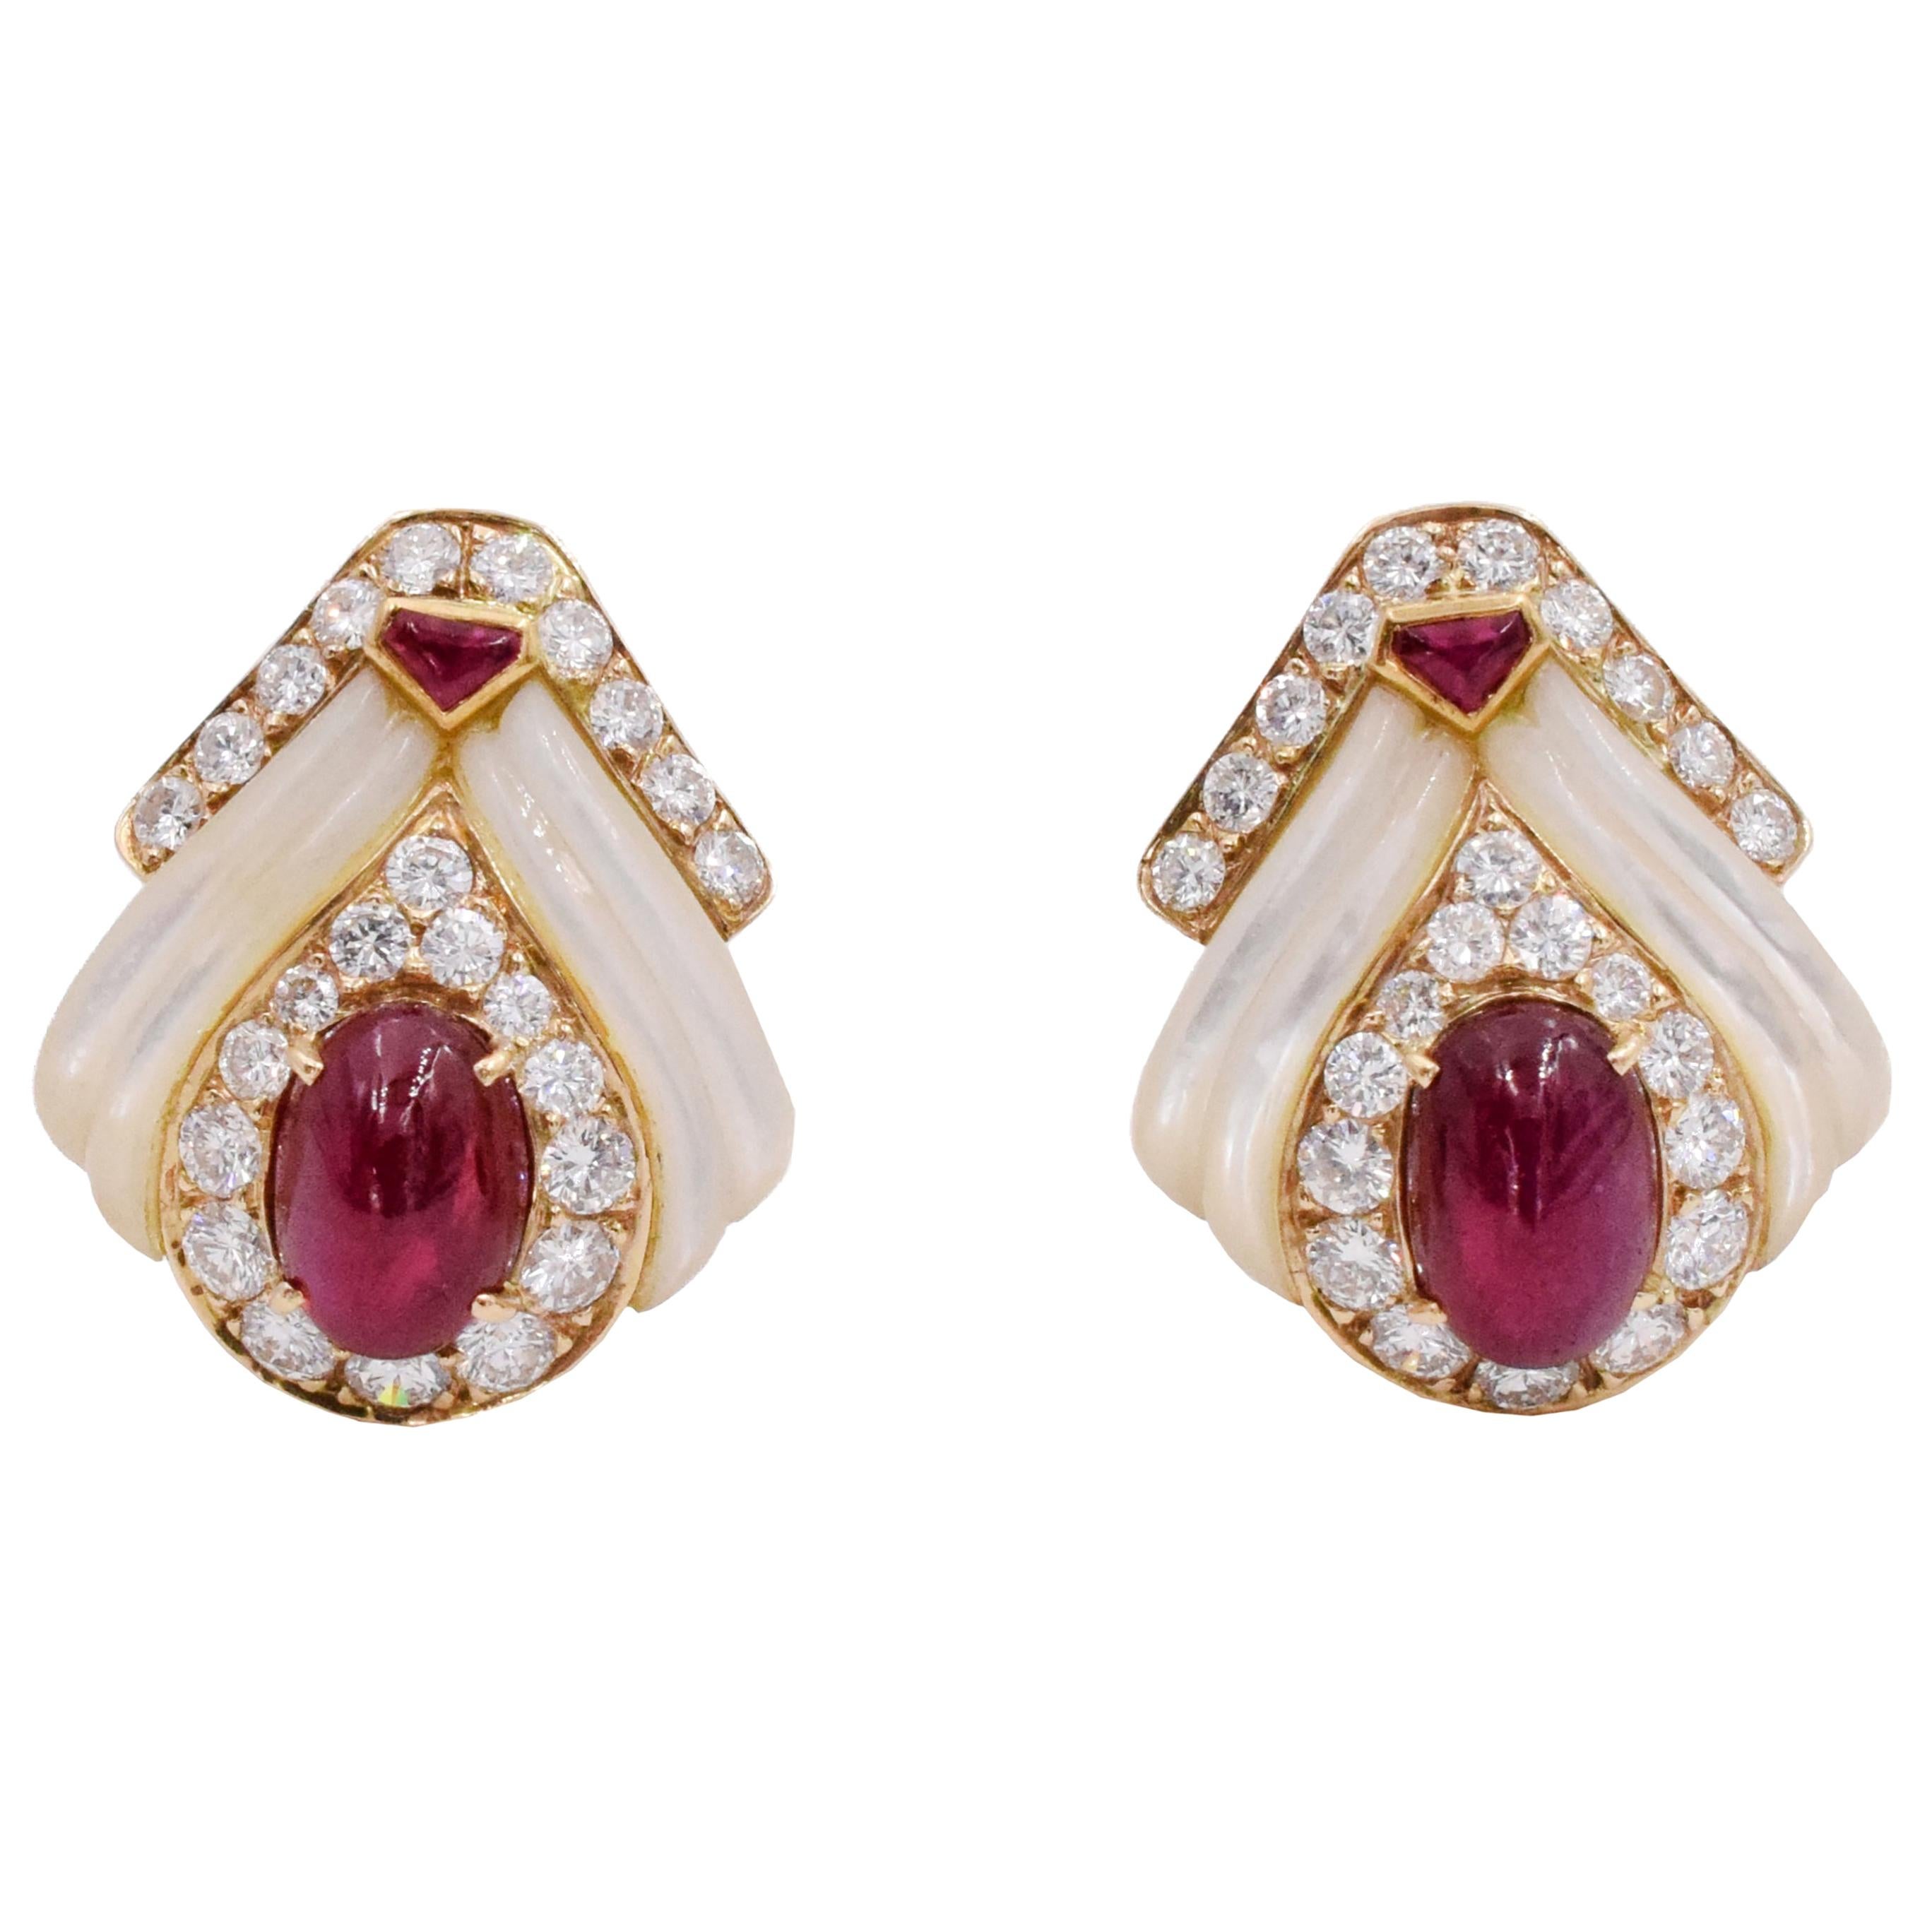 Mauboussin Paris Ruby, Mother of Pearl and Diamond Ear Clips